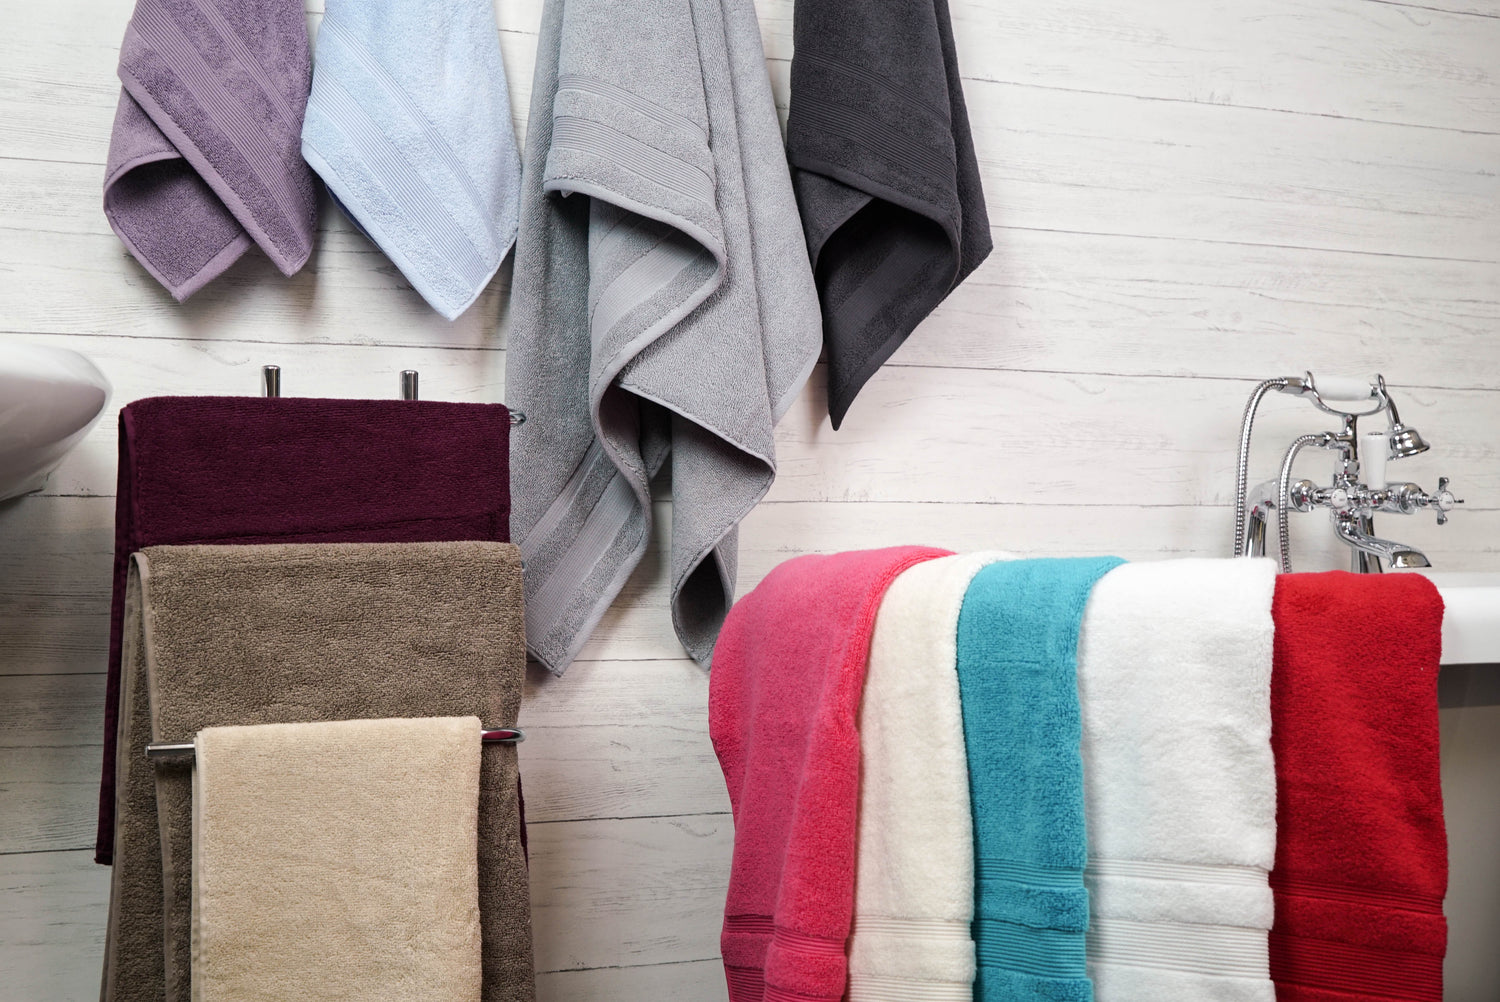 Why Choose Egyptian Cotton Bath Towels?